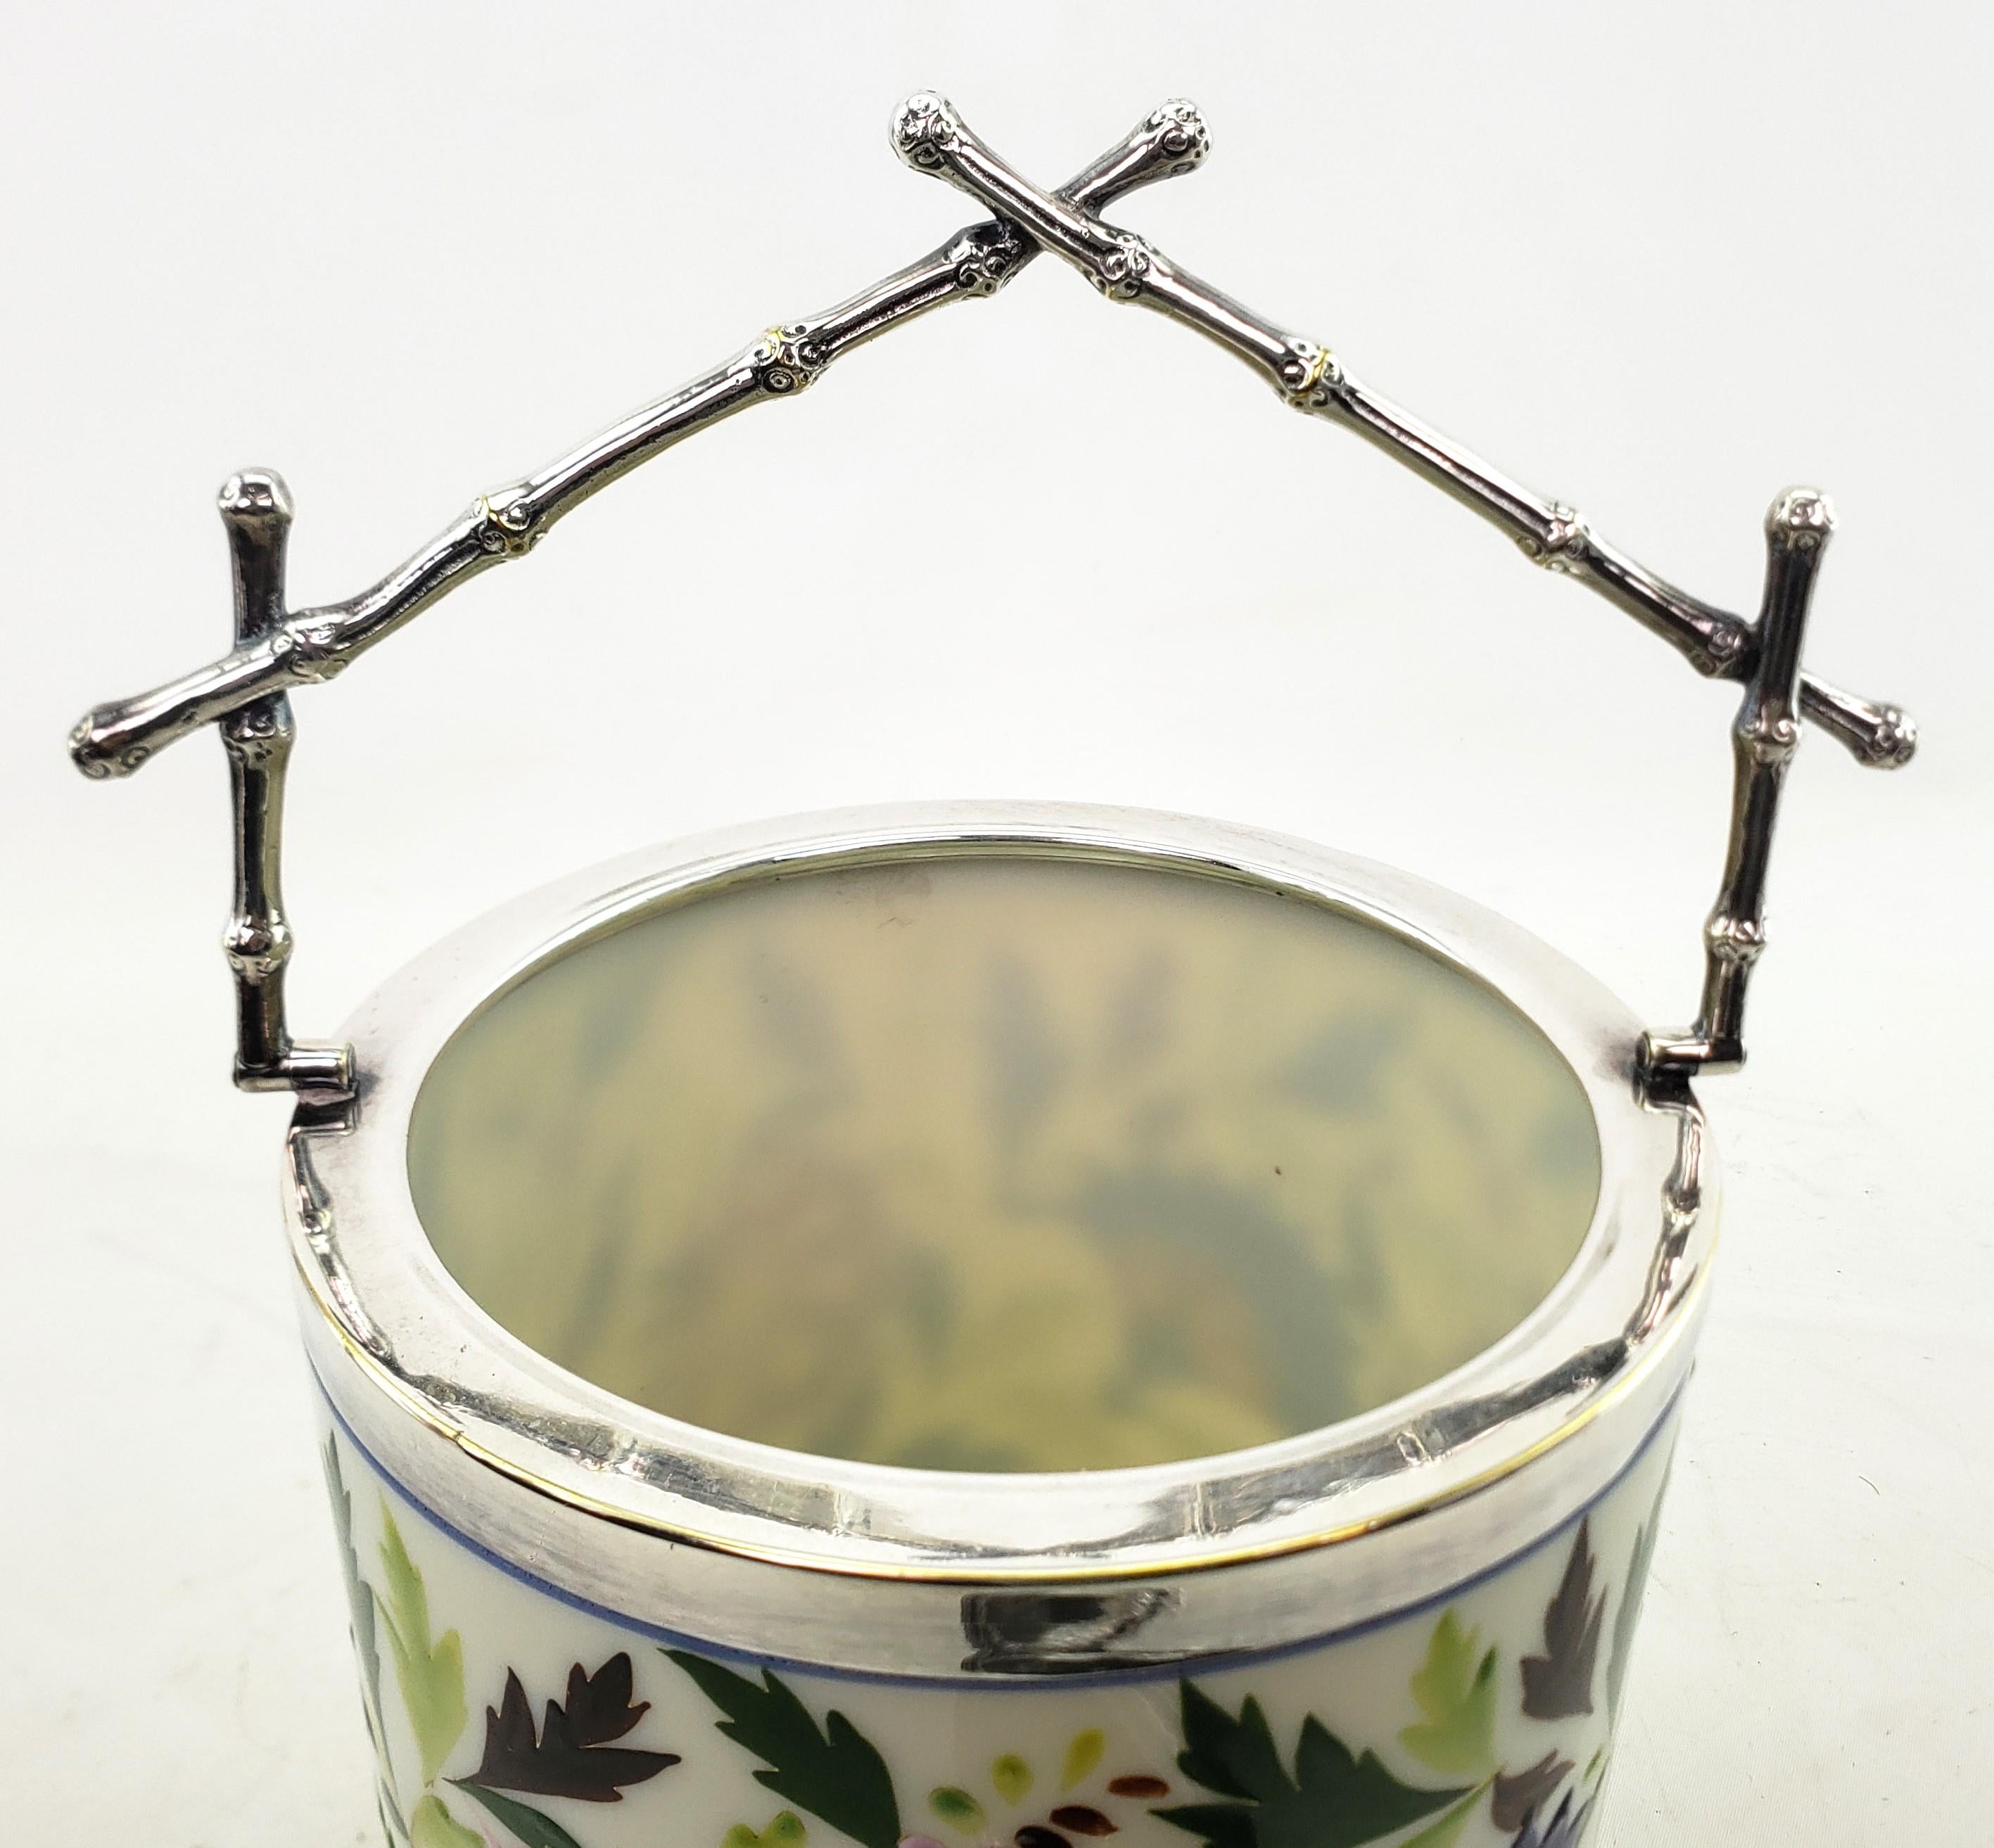  Silver Plated & Ceramic Biscuit Barrel with Floral Decoration & Twig Handle For Sale 2